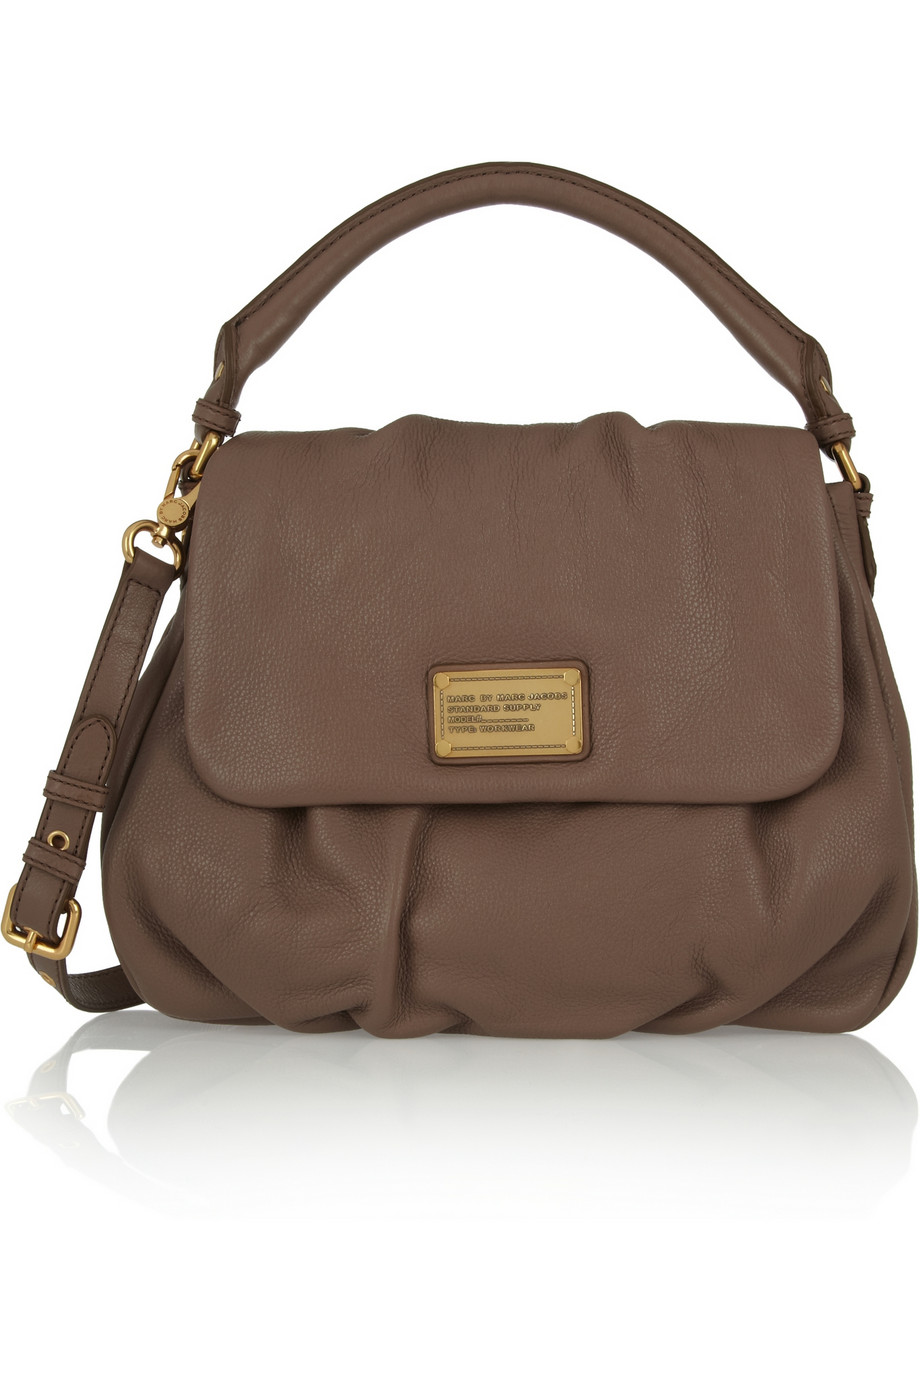 Marc By Marc Jacobs Classic Q Lil Ukita Textured Leather Shoulder Bag in Beige (Neutrals) | Lyst